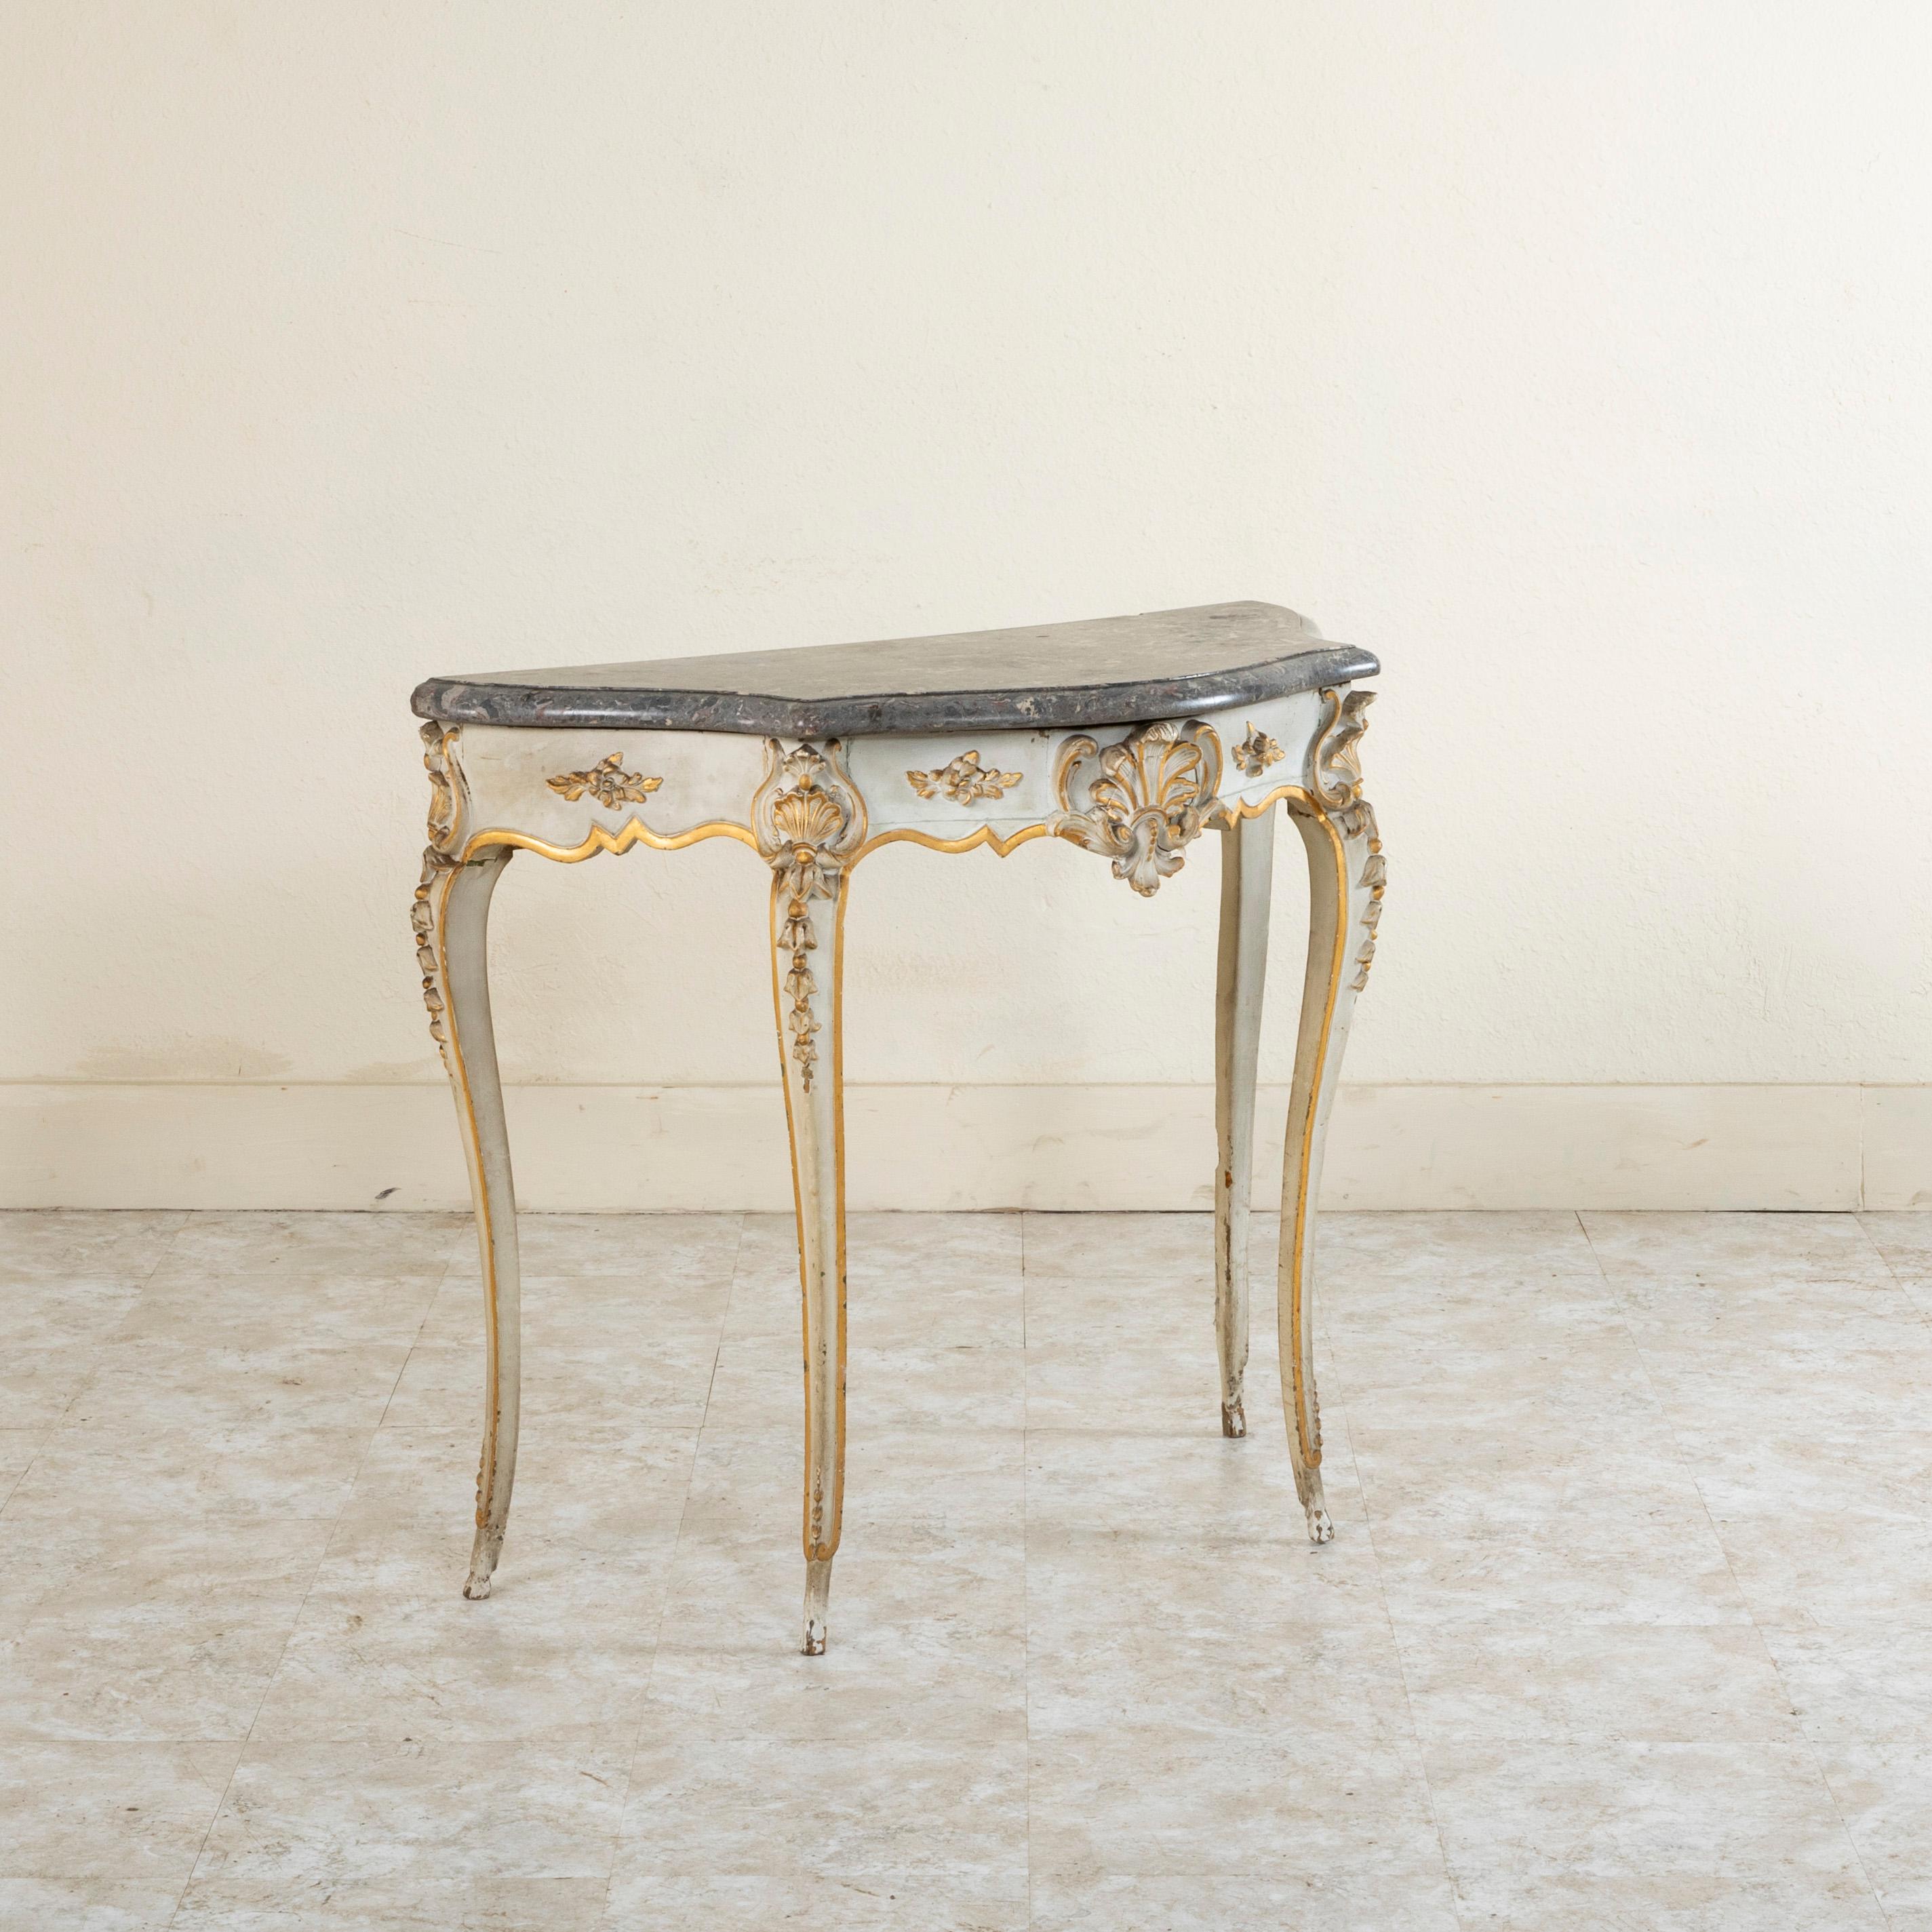 This mid nineteenth century French Louis XV style painted console table features a beveled marble top. Painted in a greyish white with gold accents, this console is detailed with a central hand carved shell flanked by gadrooning leaves. The shell